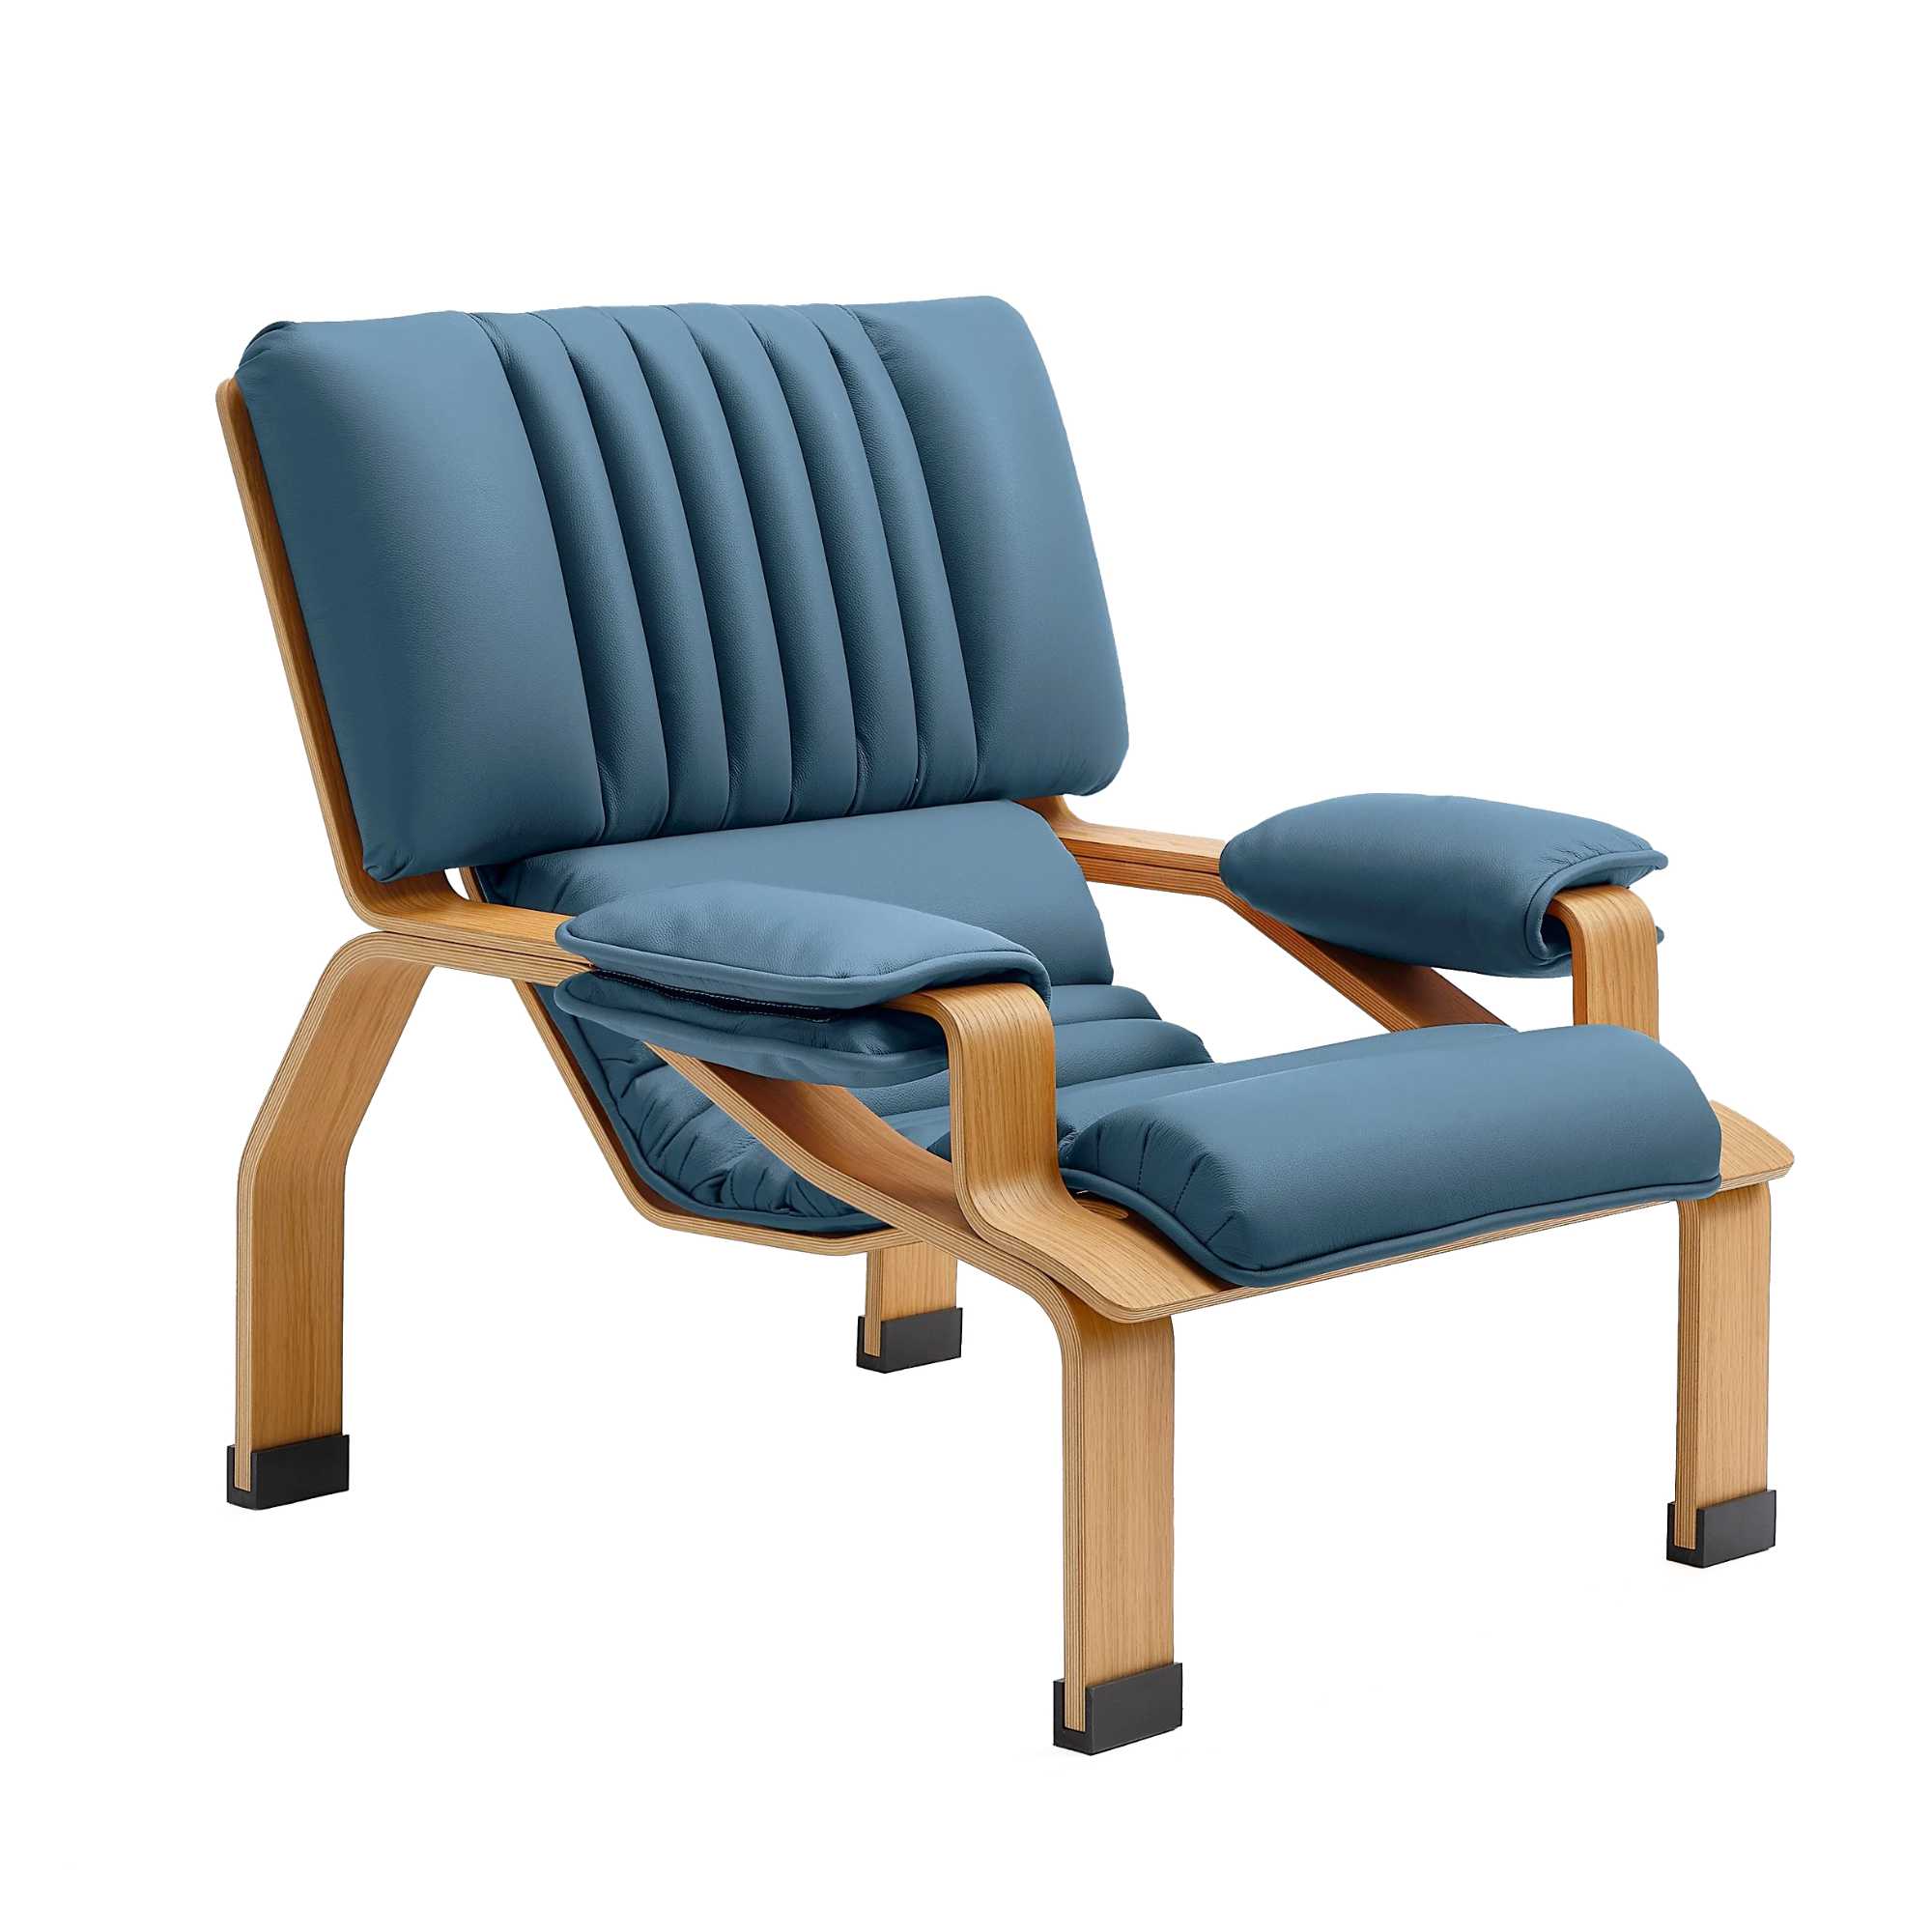 B-line SUPERCOMFORT ergonomic armchair with leather and oak armrests, blue